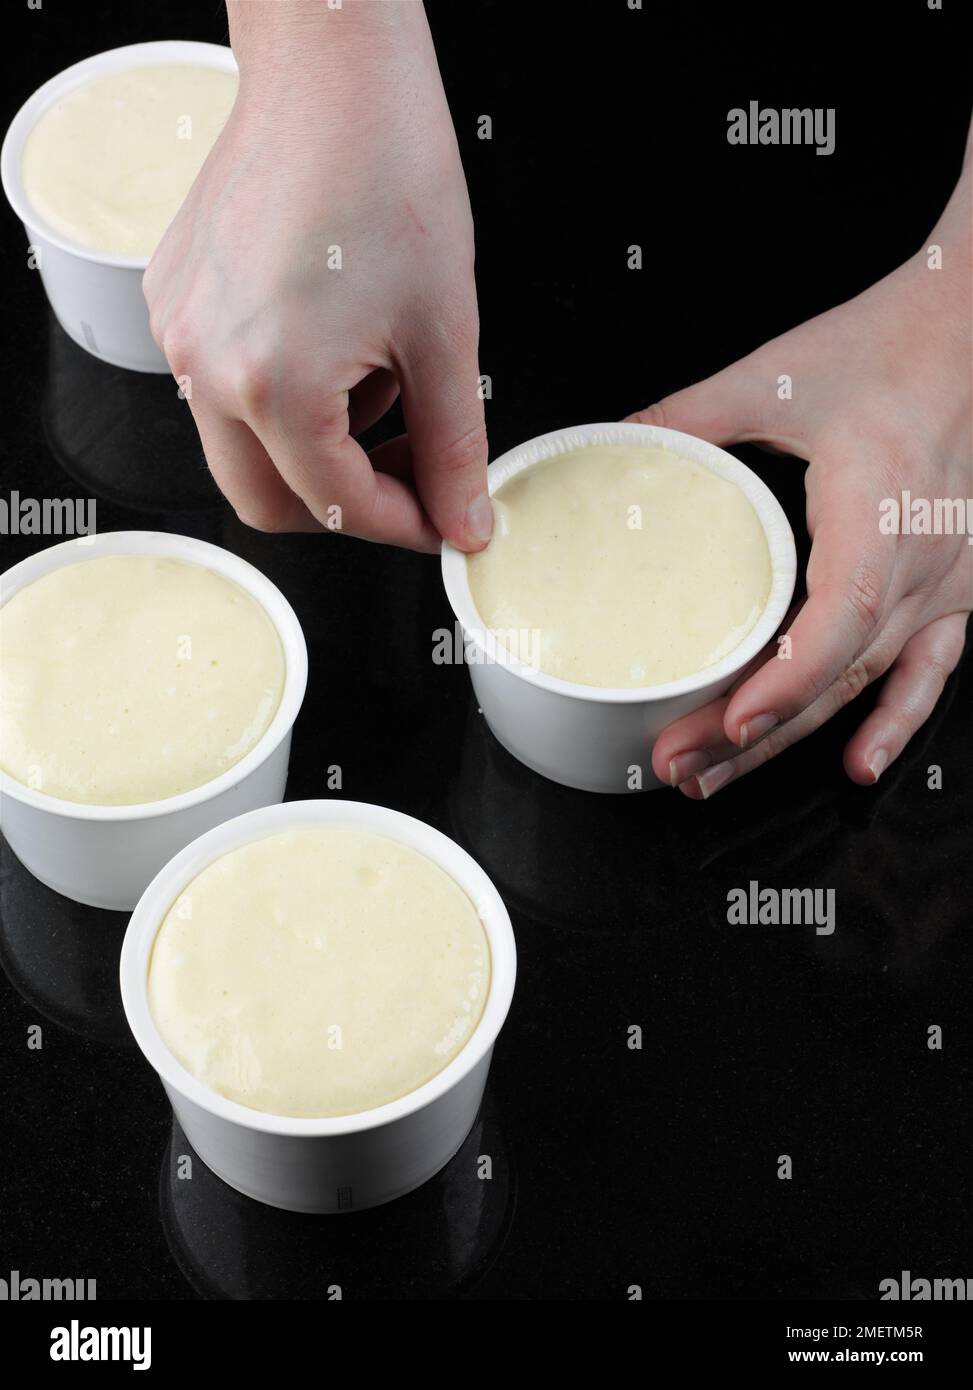 Making cheese souffles, woman running thumb nail around the inside rim of ramekin to prevent the souffle catching the sides Stock Photo